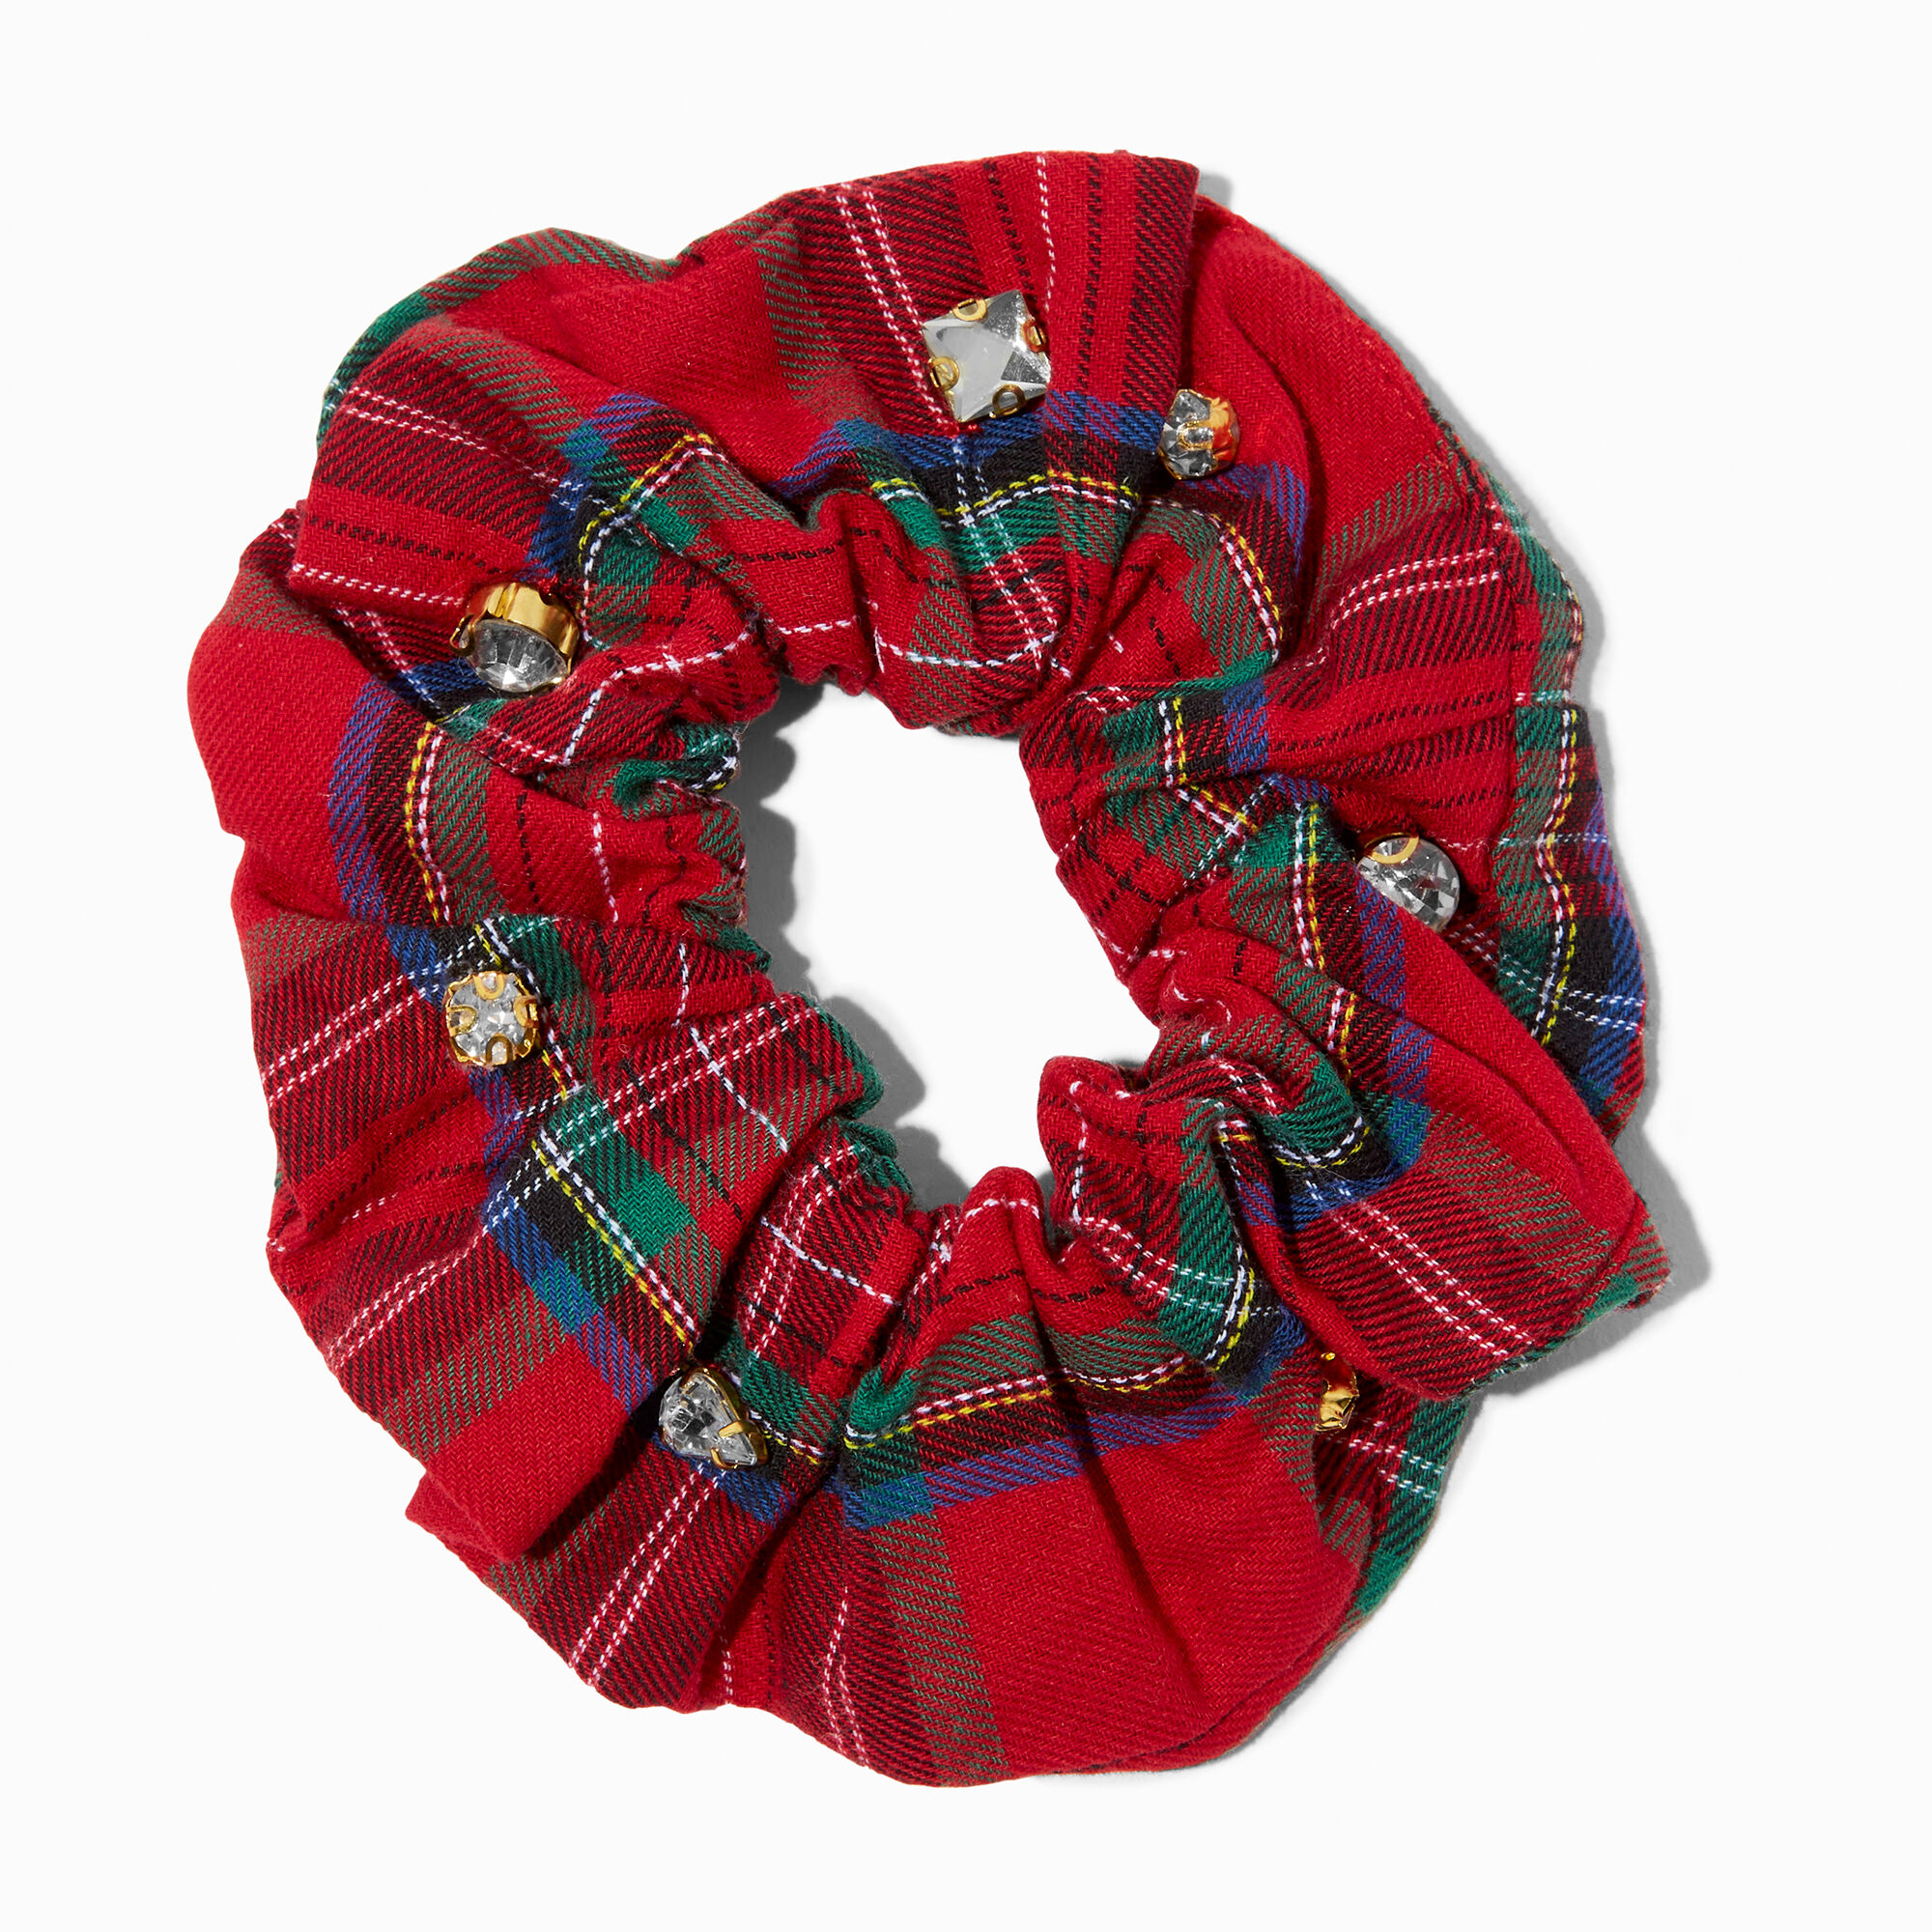 View Claires Plaid Crystal Embellished Hair Scrunchie Red information